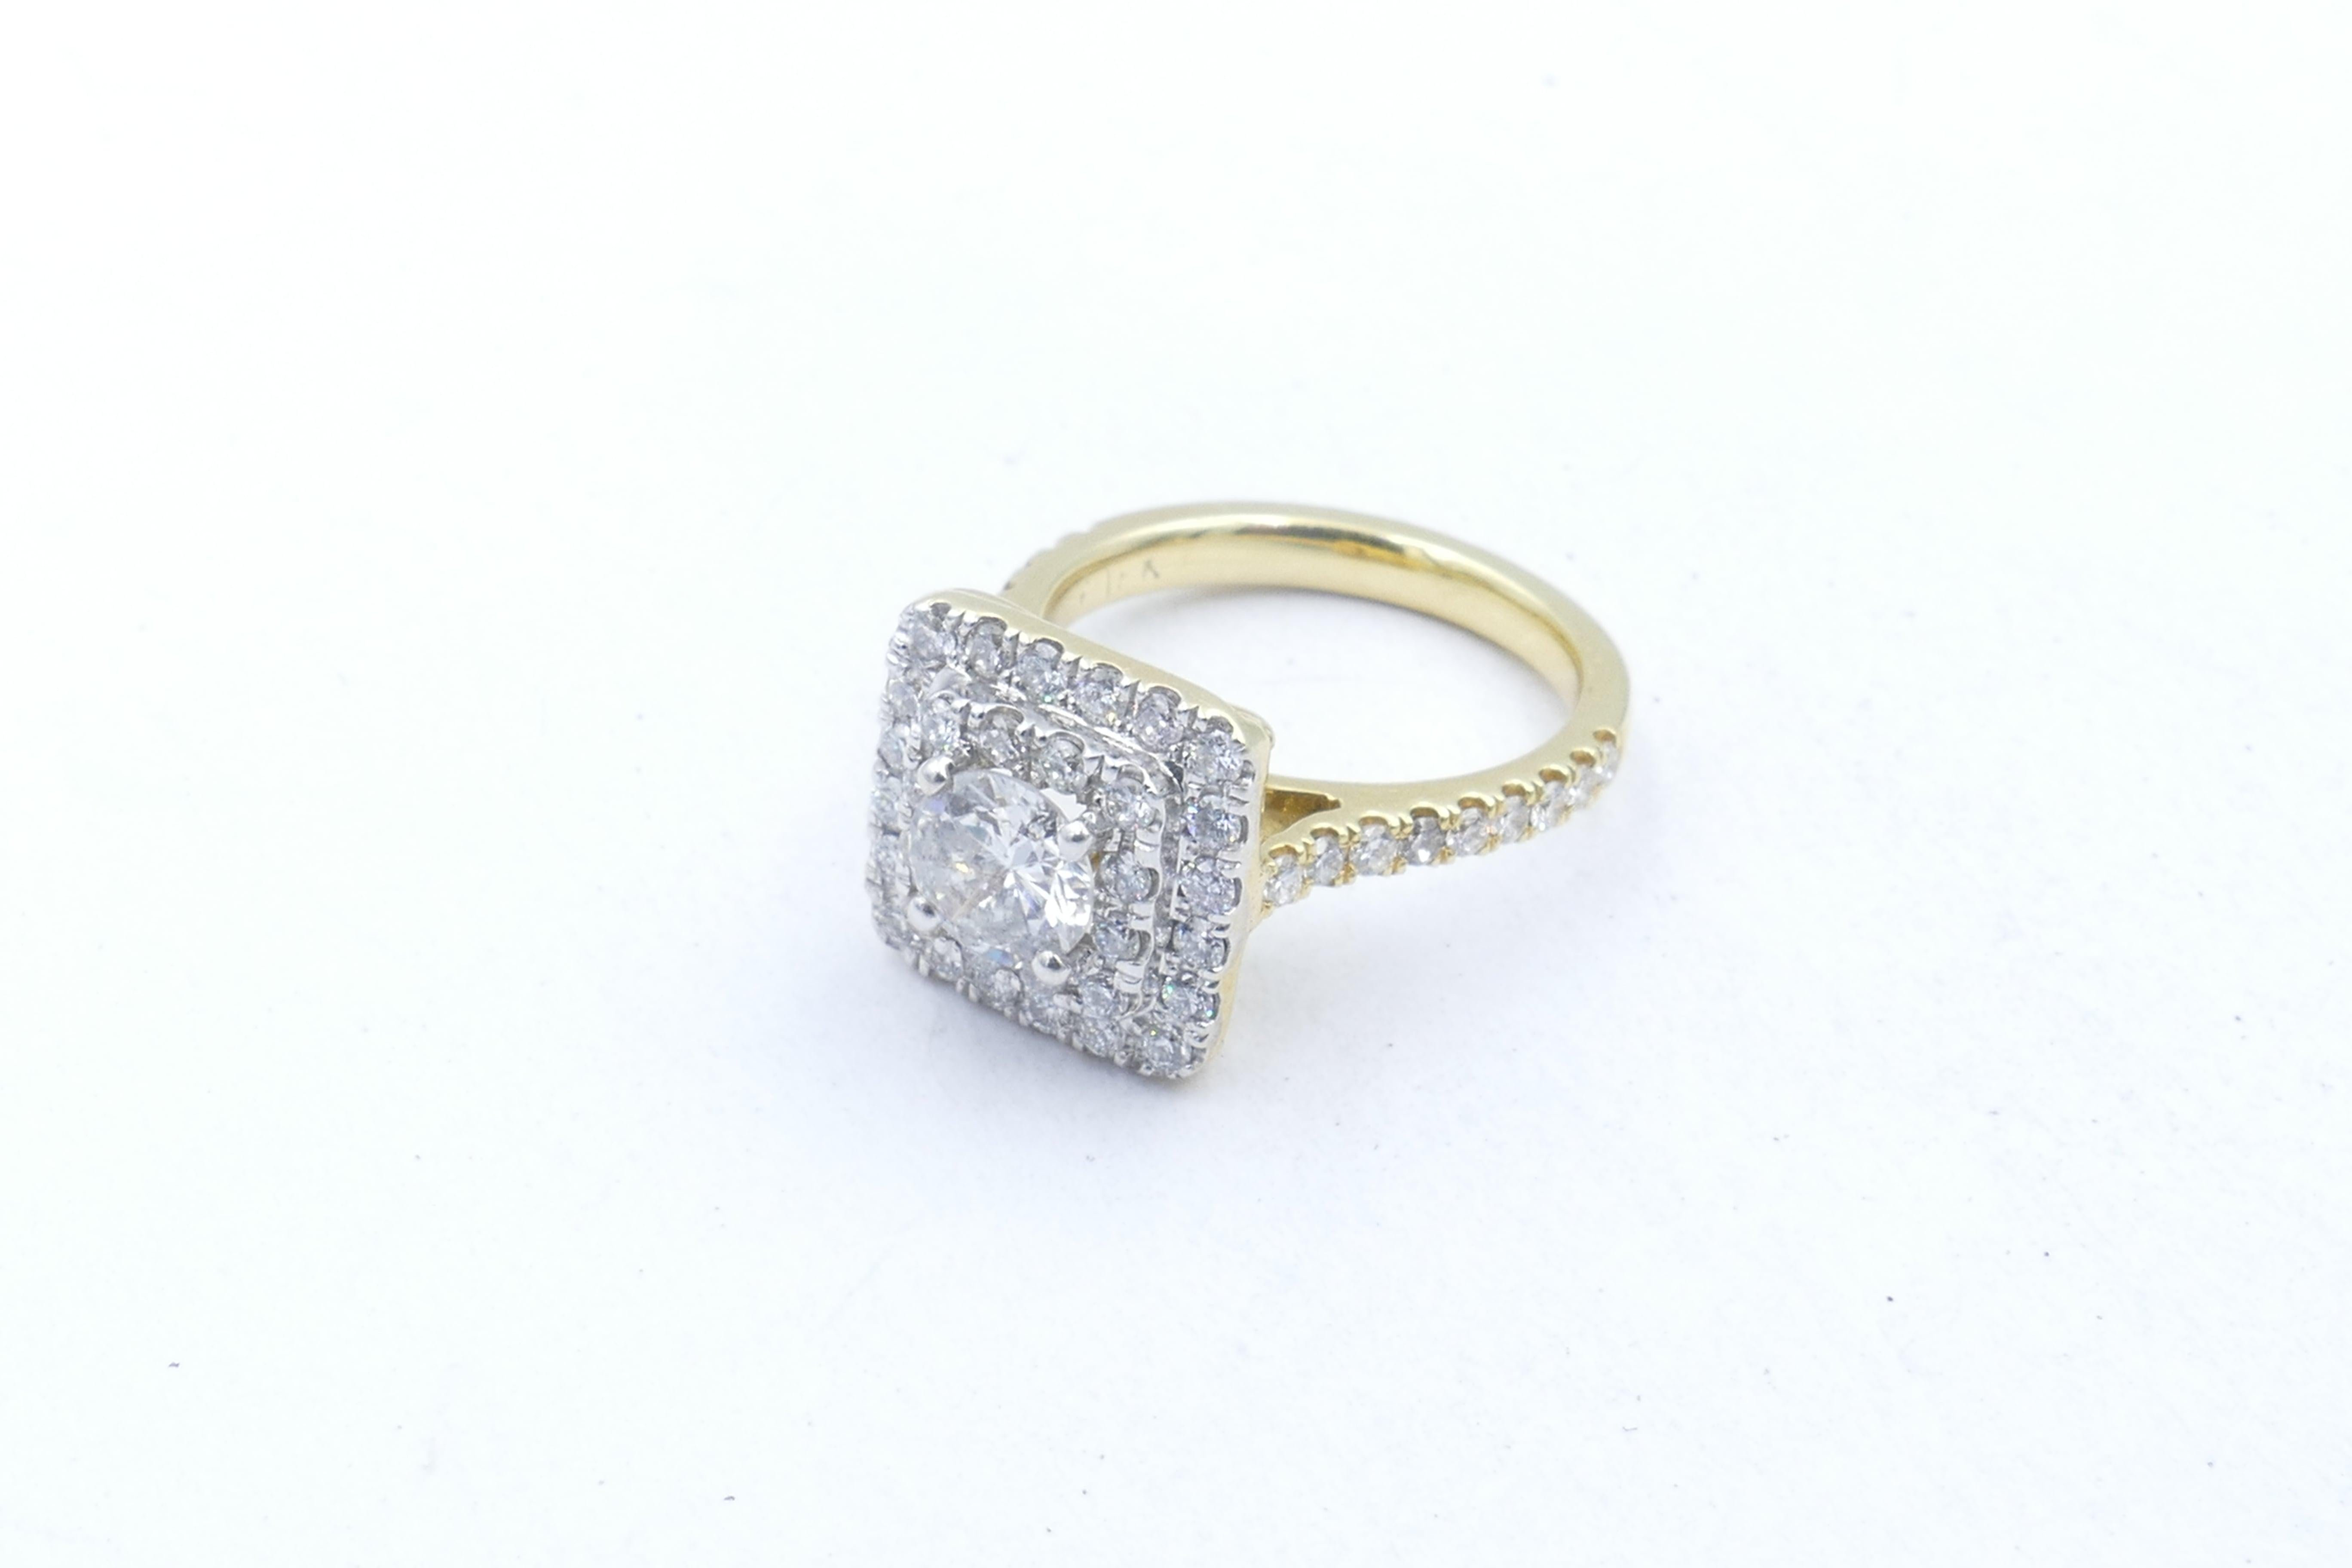 This beautiful high class Diamond Tablet Ring is colour G, clarity SI1, is 4 claw set, surrounded by 2 rows of 50 round brilliant cut Diamonds set in 18ct White Gold.
The Band is polished, low half round, upswept to a basket underrail, measuring